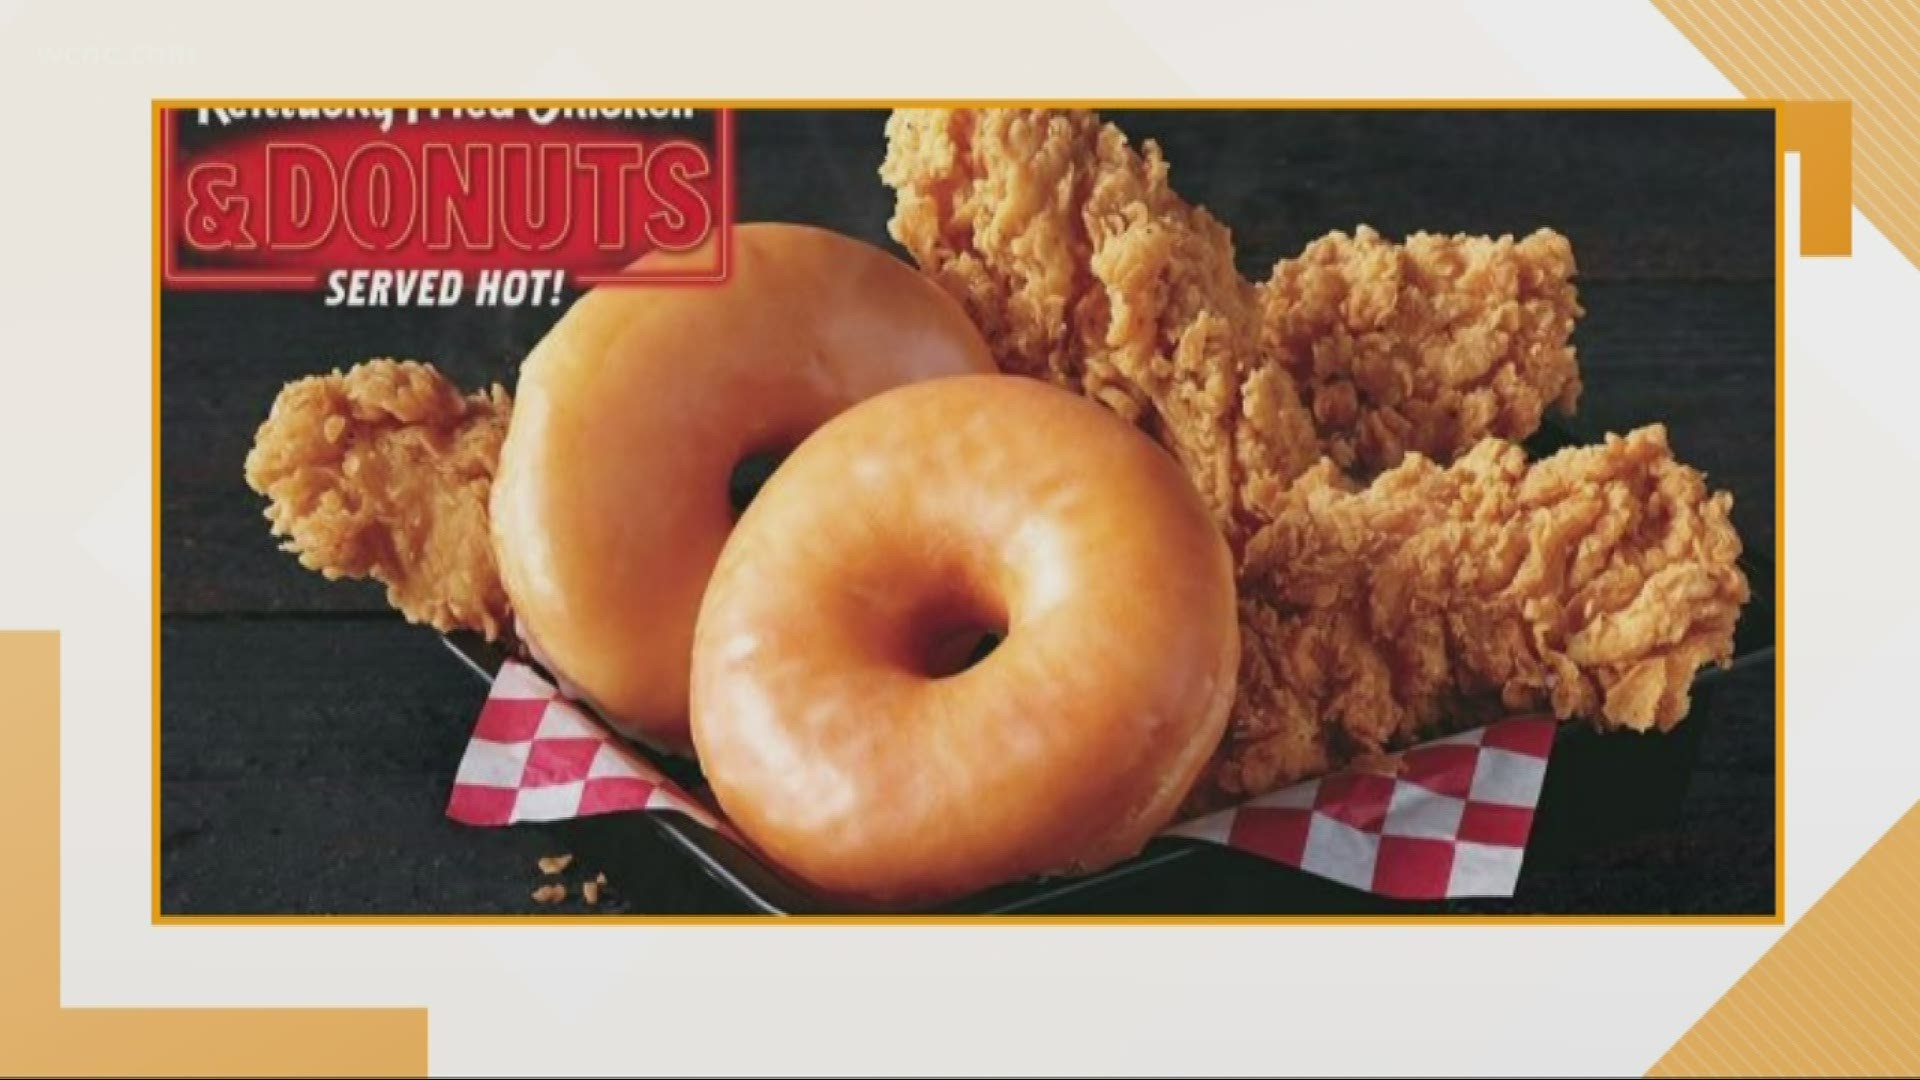 KFC is getting back into the news with their latest menu item: Fried chicken and donuts. Currently being tested at about 40 states in Virginia and Pennsylvania, KFC is offering their customers a choice: A sandwich with donuts for buns, or you can get the donuts on the side.